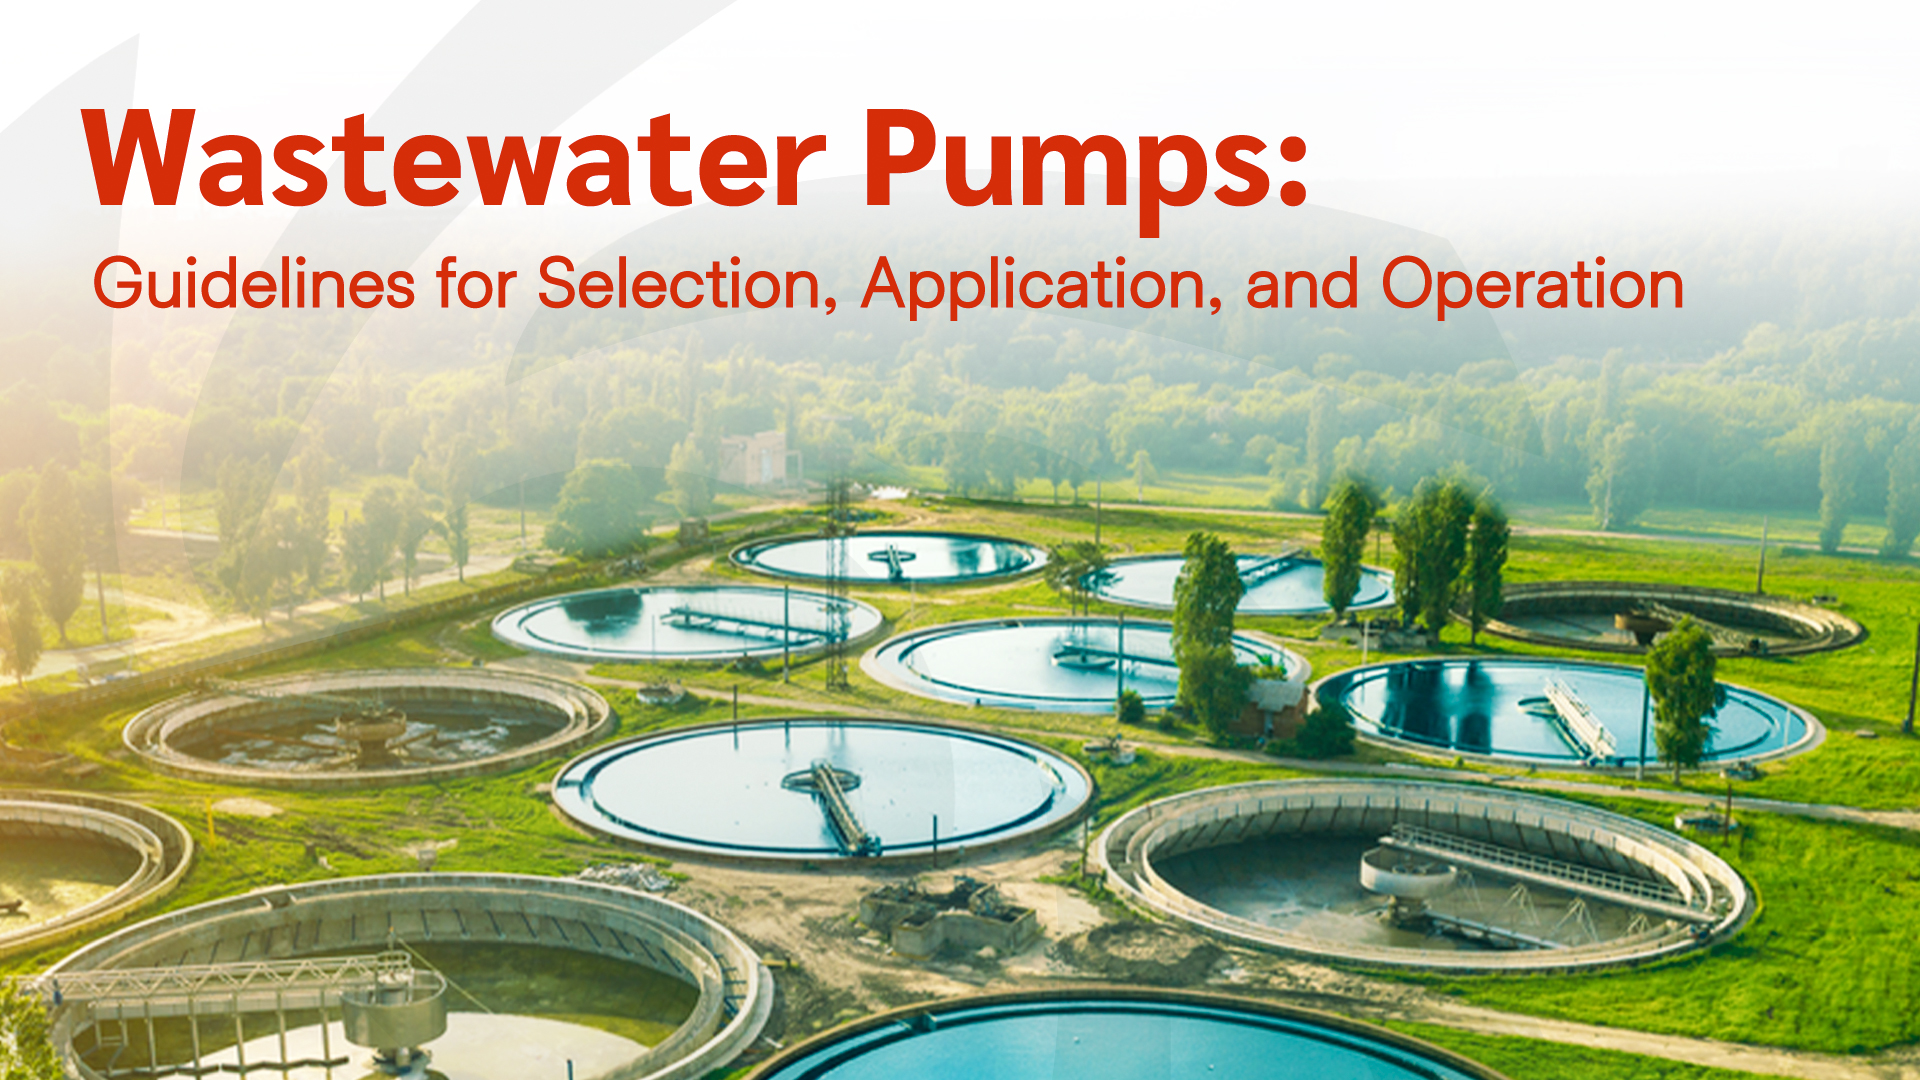 Wastewater Pumps: Guidelines for Selection, Application, and Operation